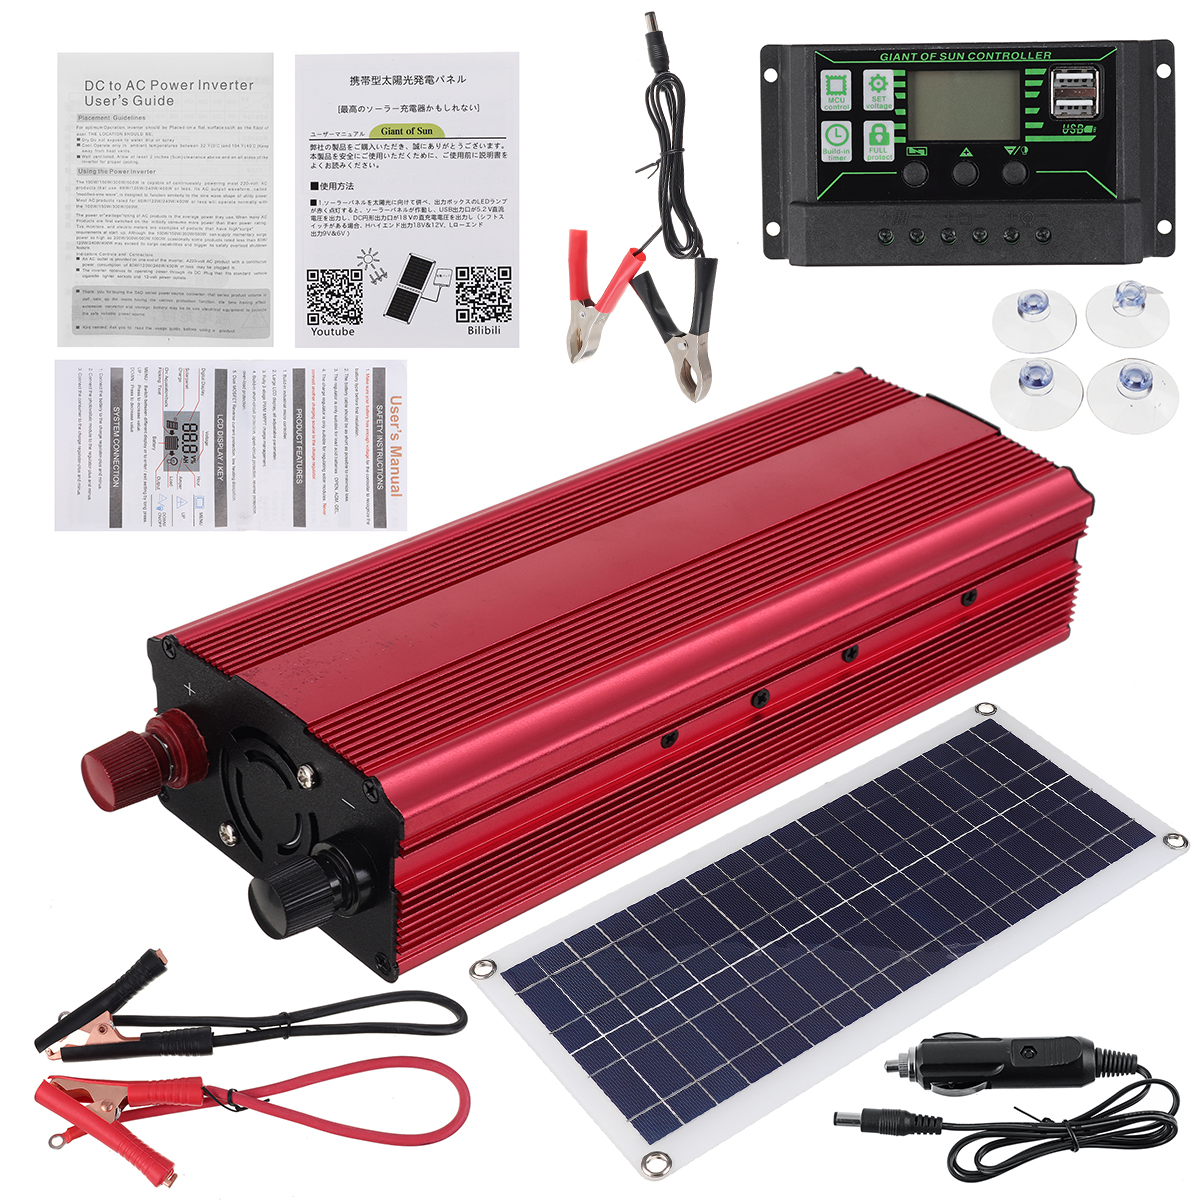 Solar-Power-System-Inverter-Kit-10A30A60A100A-Charge-Controller-2000W-Solar-Inverter-Set-1833212-7